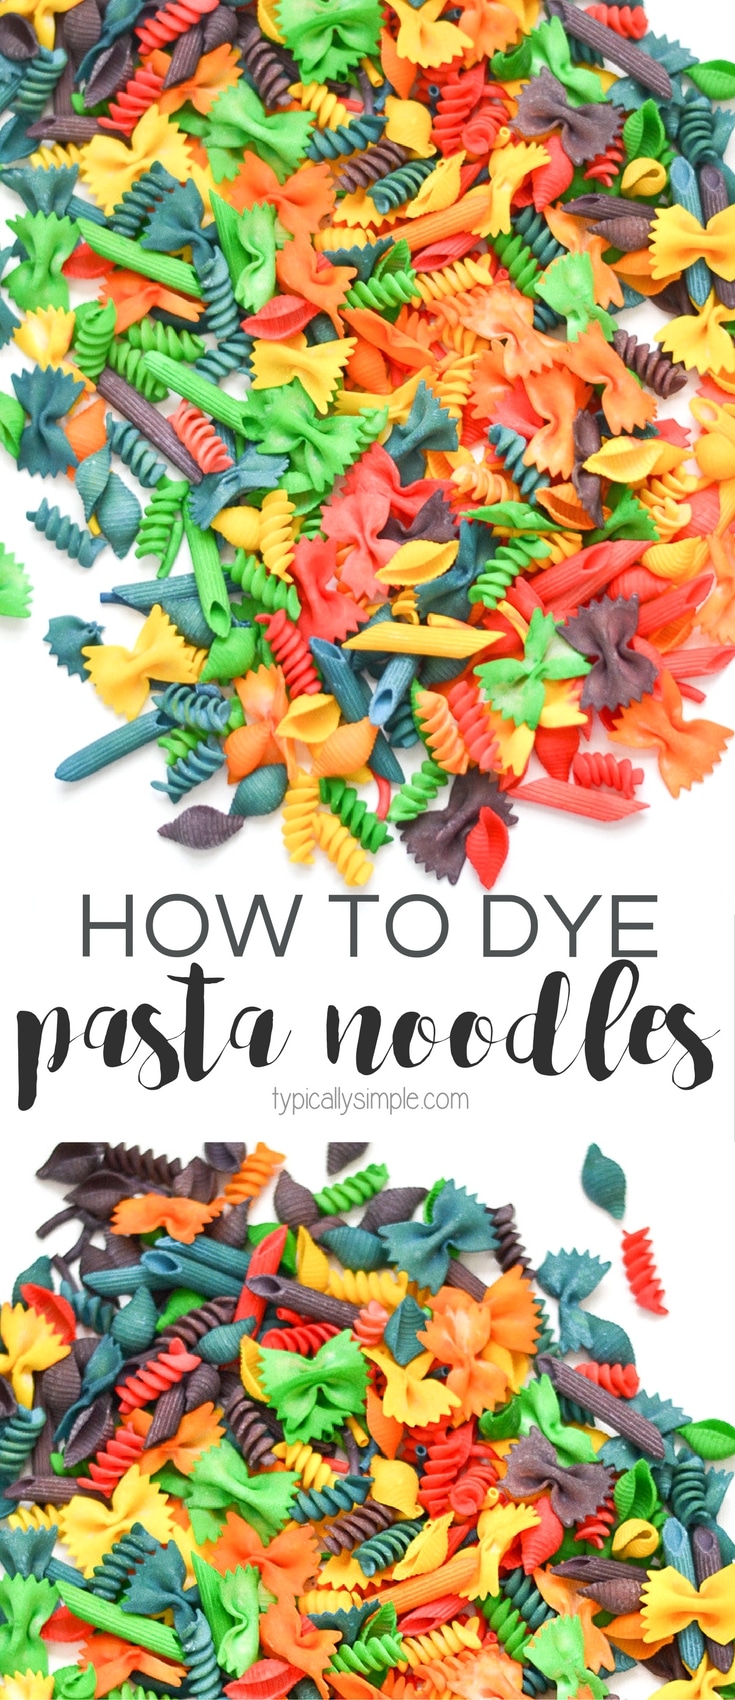 Colorful pasta noodles are great to use for crafts, sensory bins, and sorting activities. This simple tutorial will show you how to dye pasta in batches in a rainbow of colors!